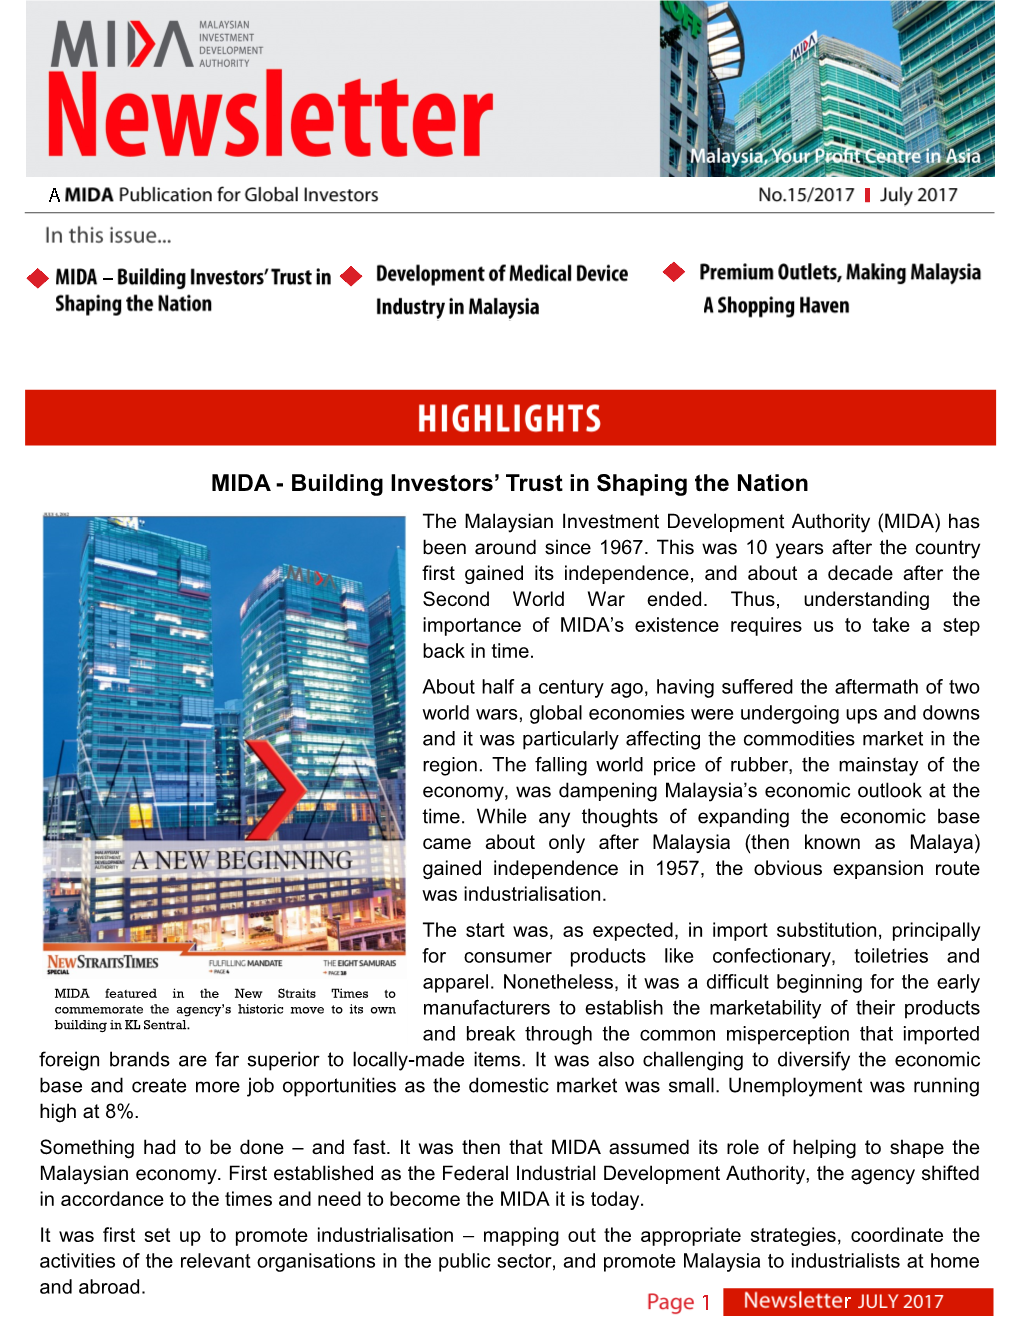 MIDA - Building Investors’ Trust in Shaping the Nation the Malaysian Investment Development Authority (MIDA) Has Been Around Since 1967